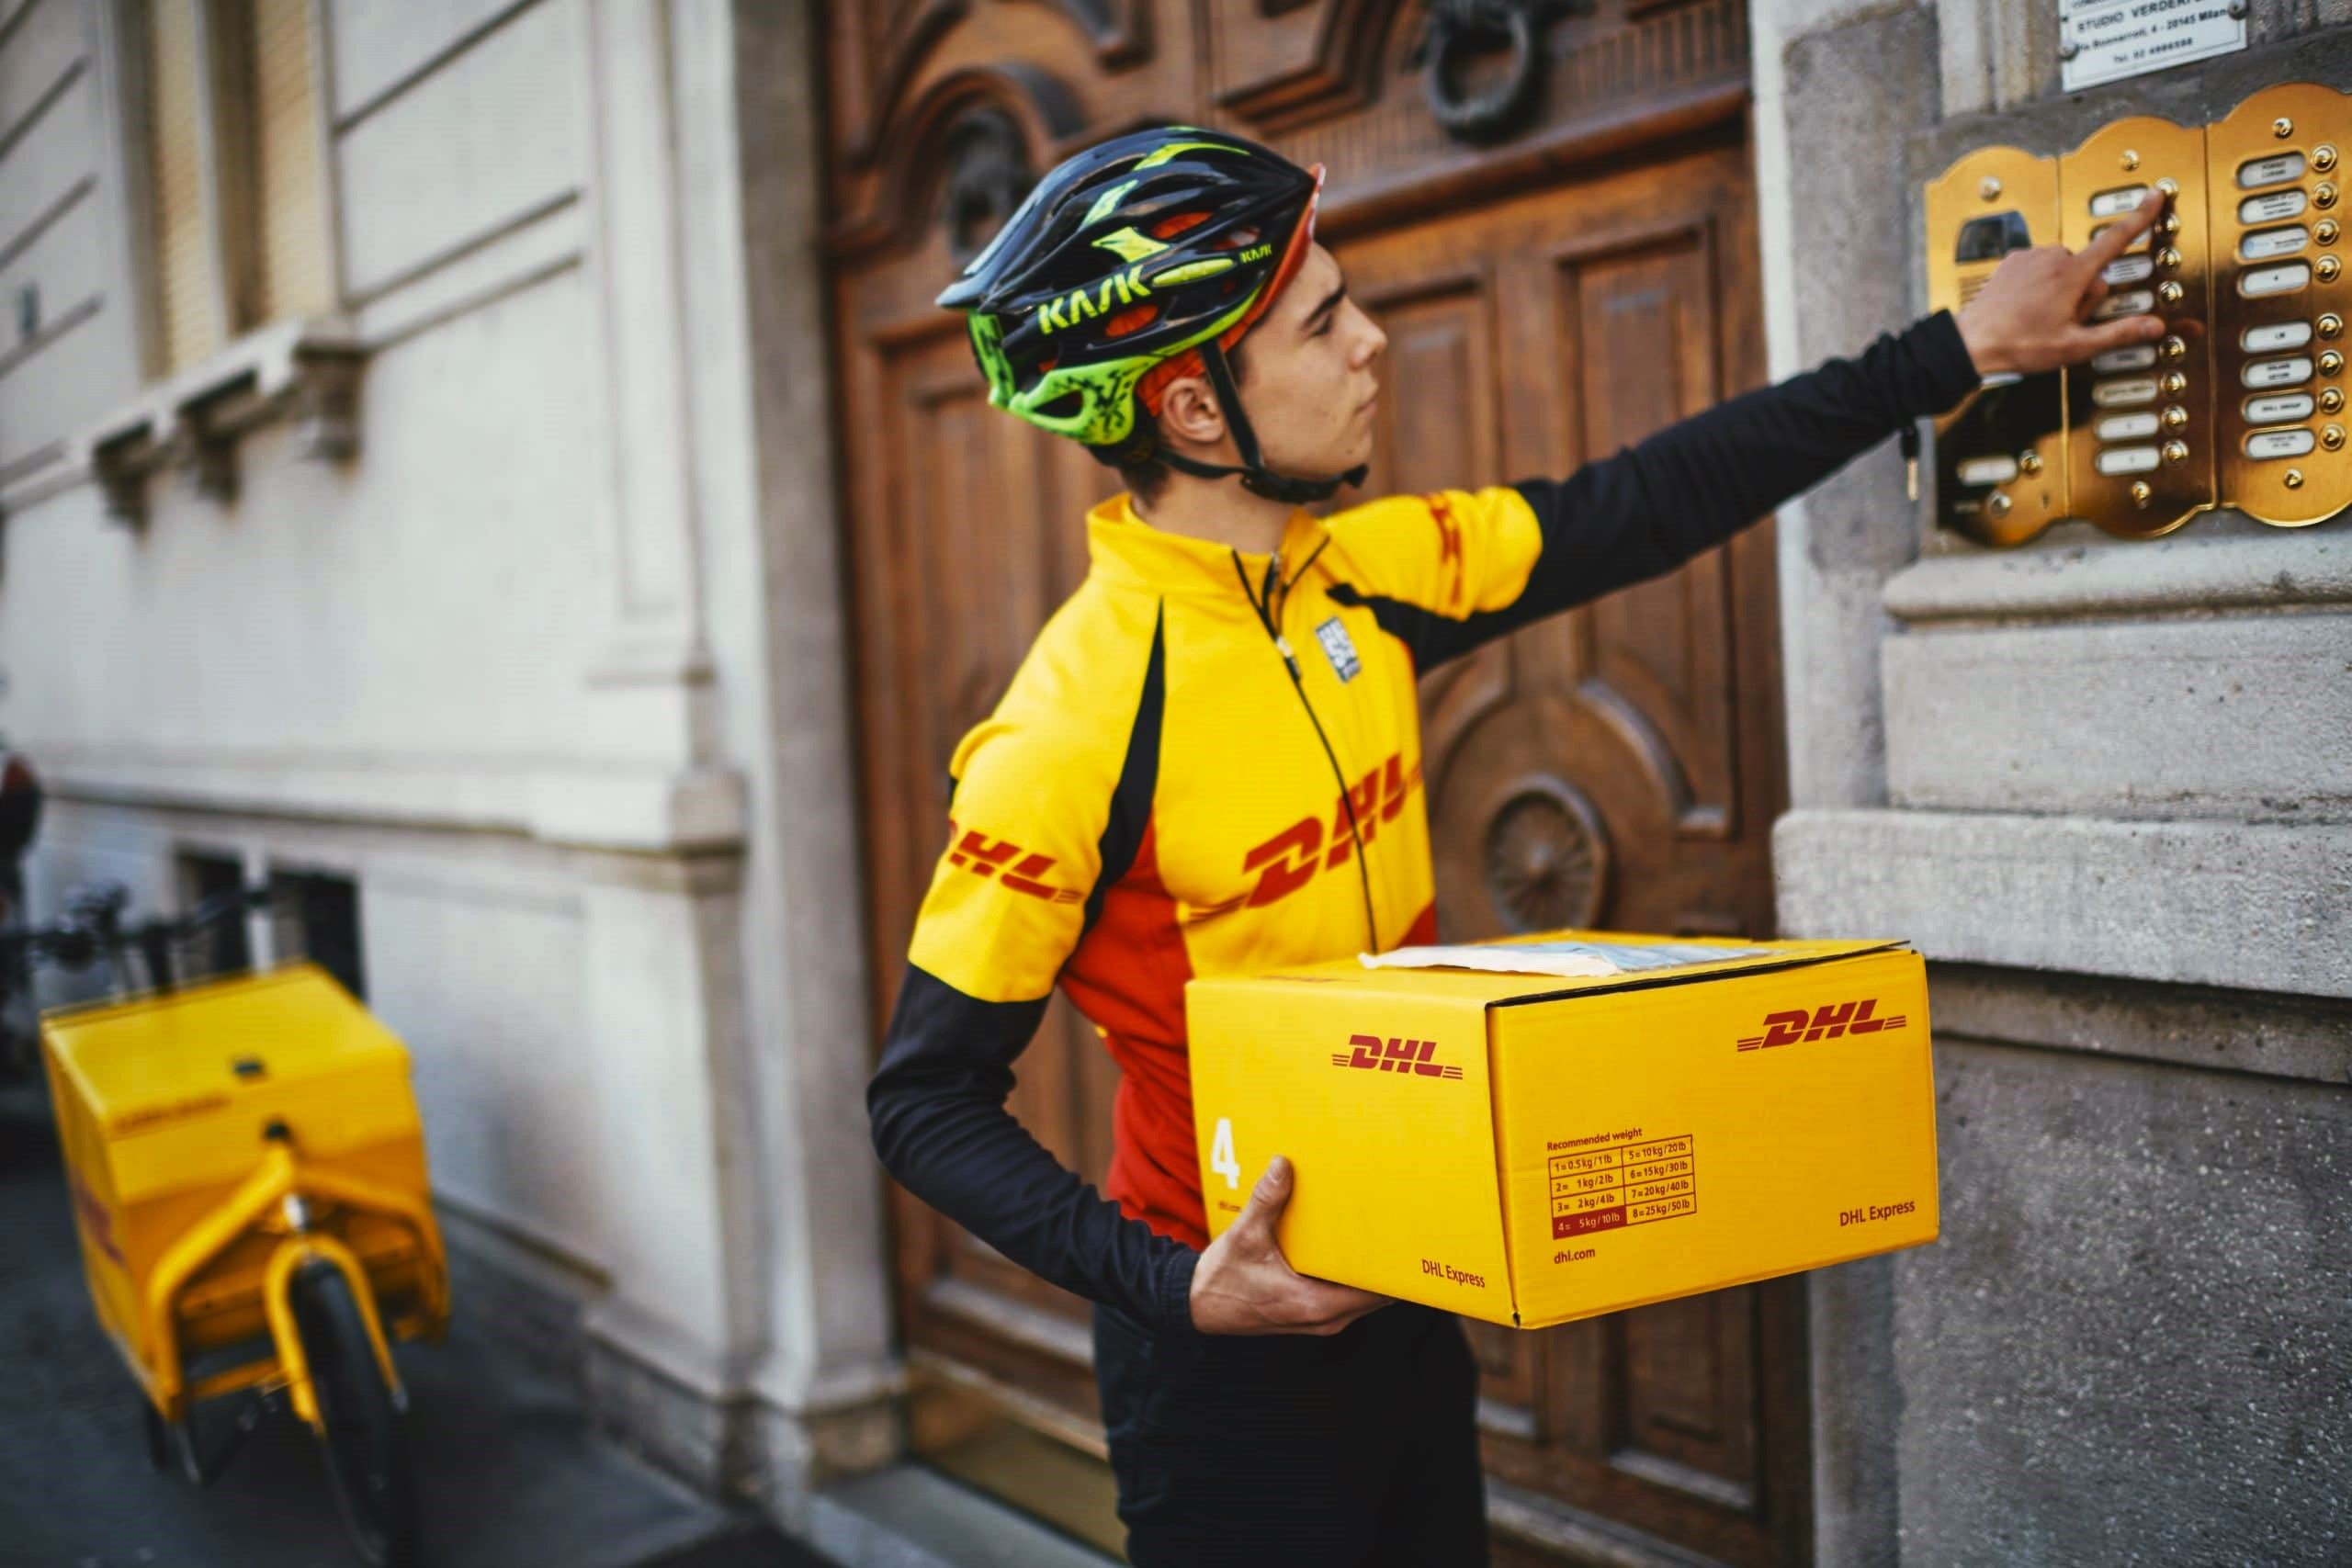 DHL’s Surprising Delivery Option: Mailbox Delivery!